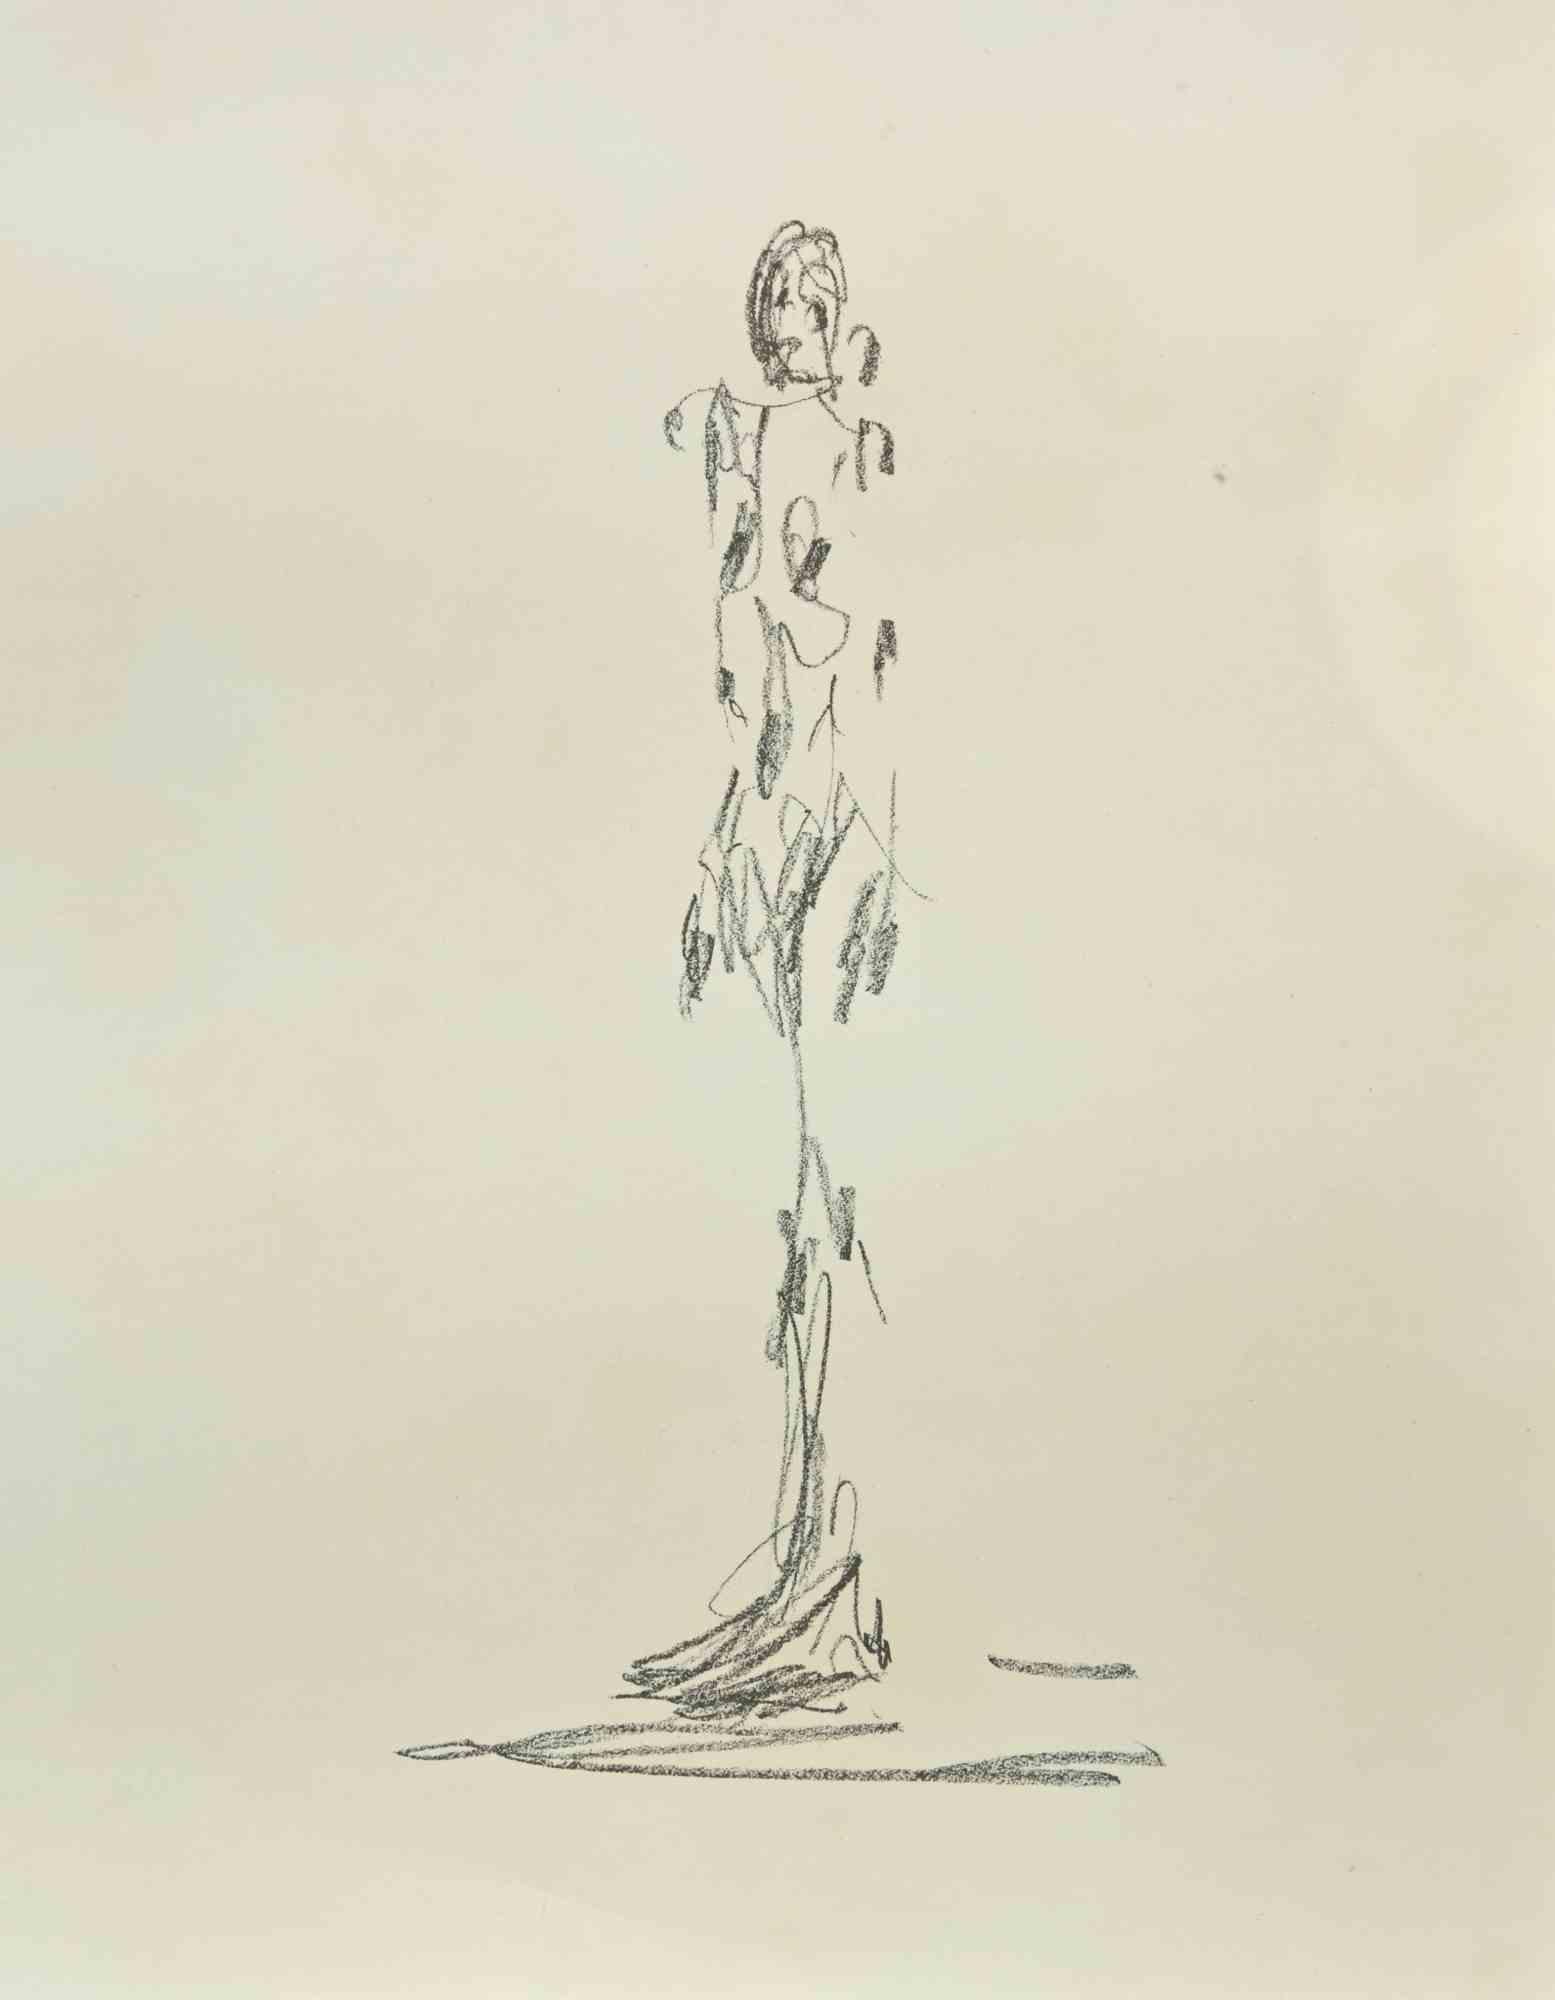 Portrait from Derriere Le Miroir is a lithograph realized after Alberto Giacometti in 1964.

The artwork is from the art Magazine Derriere Le Miroir.  

Printed by Ateliers de Maeght, Paris, 1964.

Good conditions.